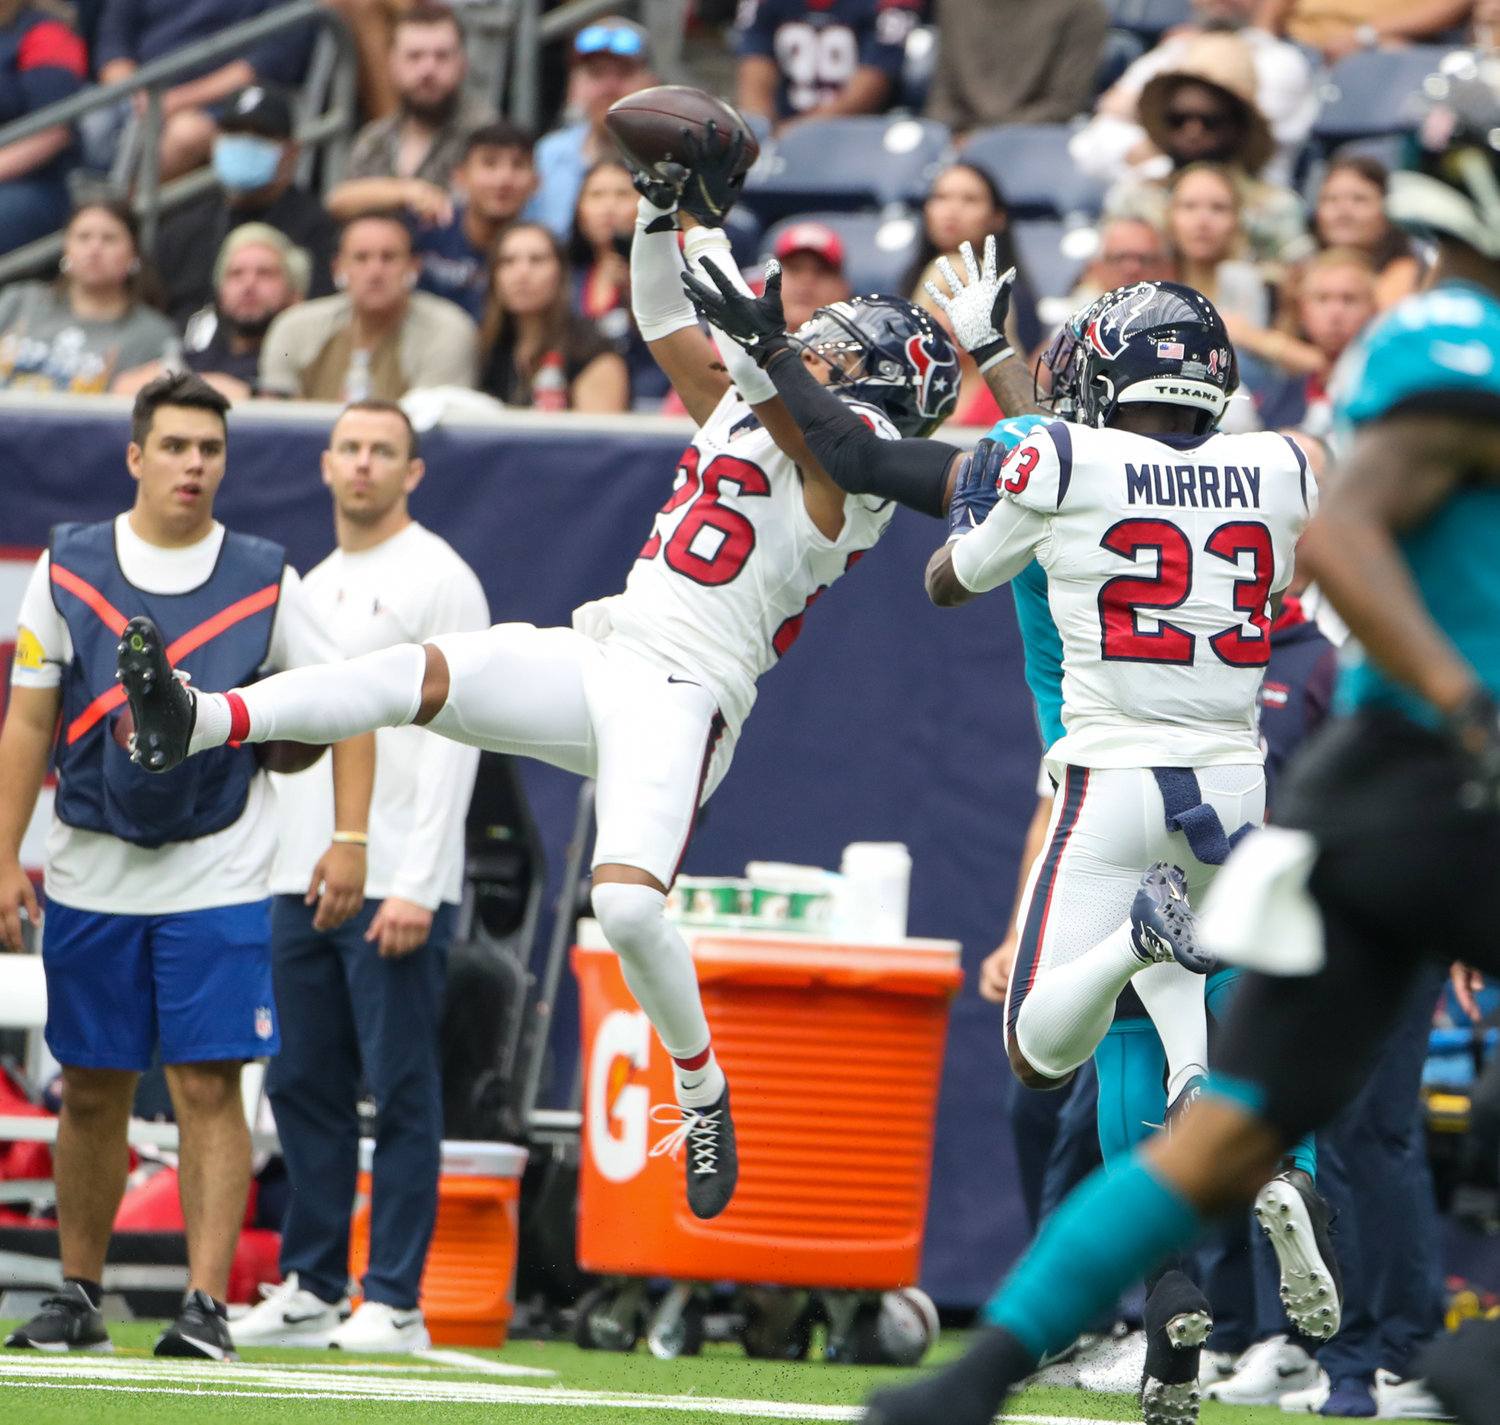 Houston Texans cornerback Vernon Hargreaves III (26) leaps to top a pass thrown by Jacksonville Jaguars quarterback Trevor Lawrence (16) during the first half of an NFL game between the Houston Texans and the Jacksonville Jaguars on September 12, 2021 in Houston, Texas.